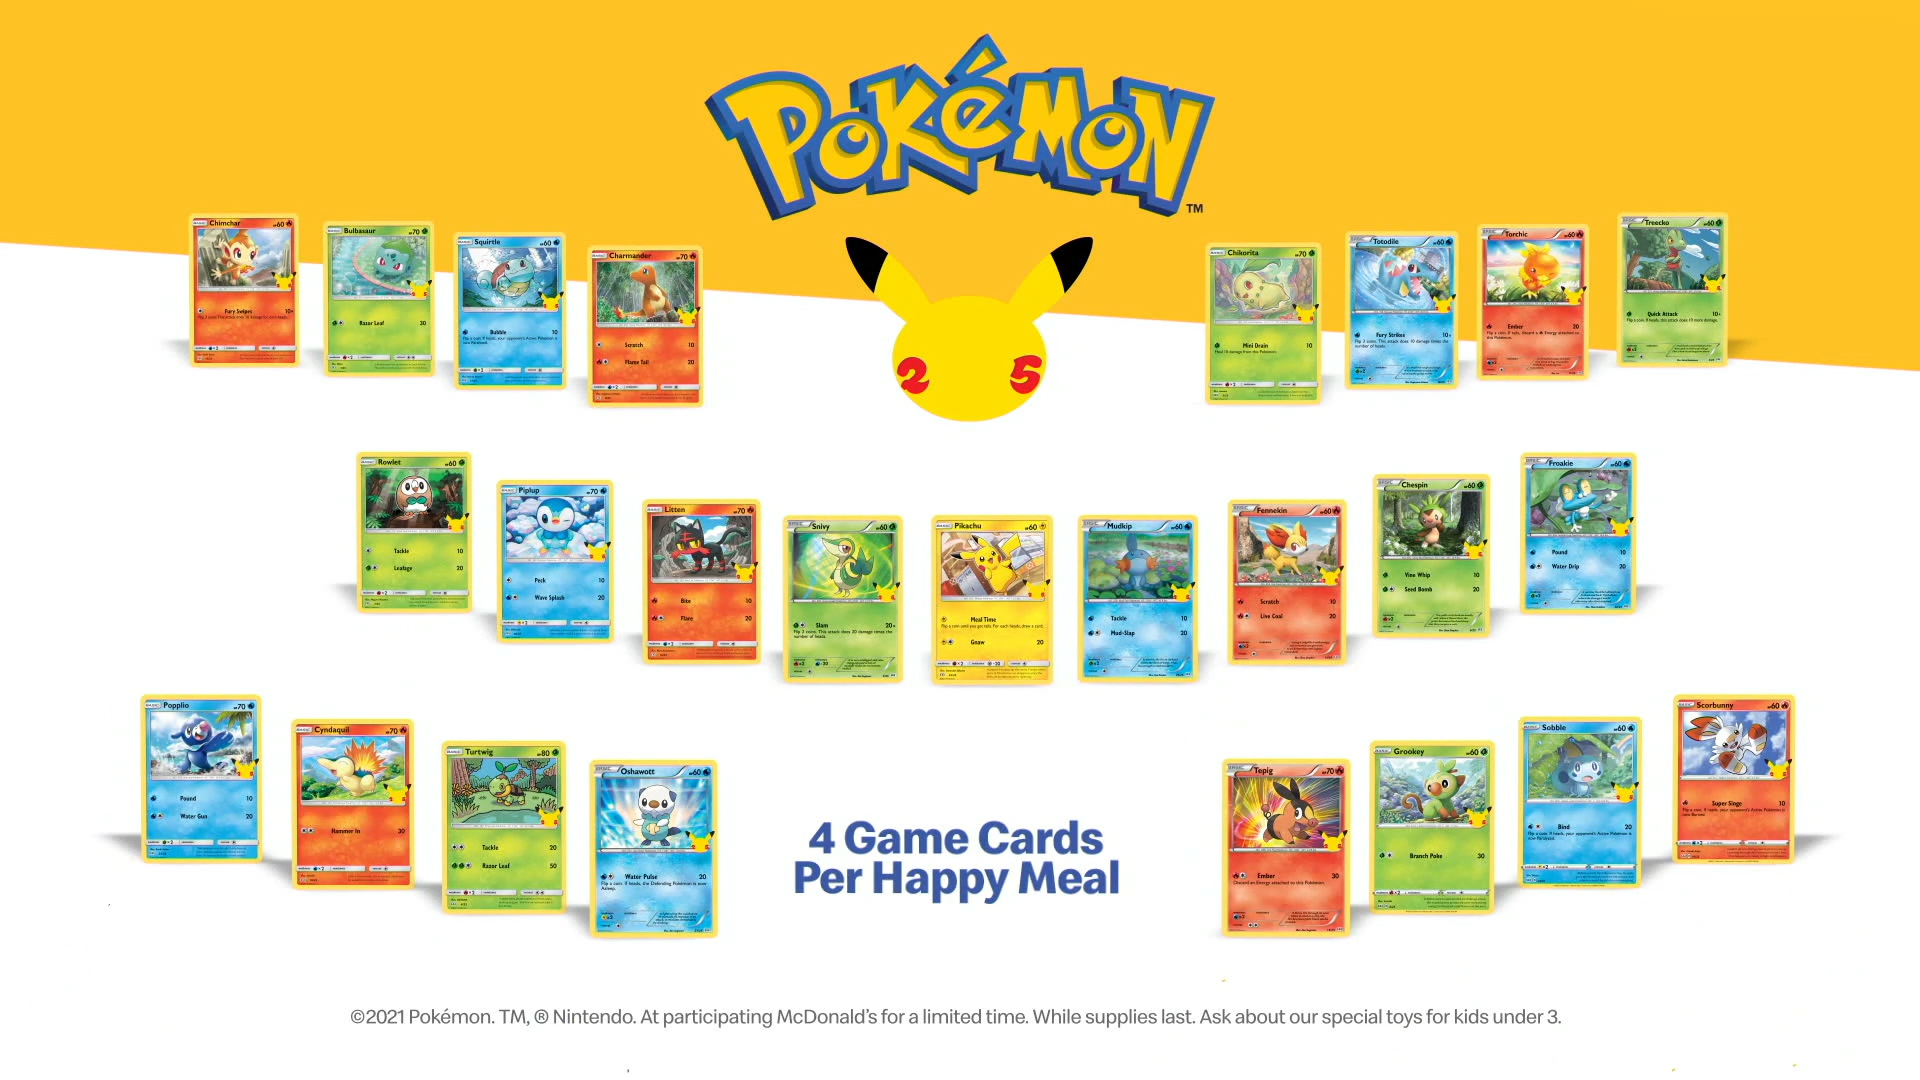 Pokémon TCG Boosters Available Now At Participating McDonalds